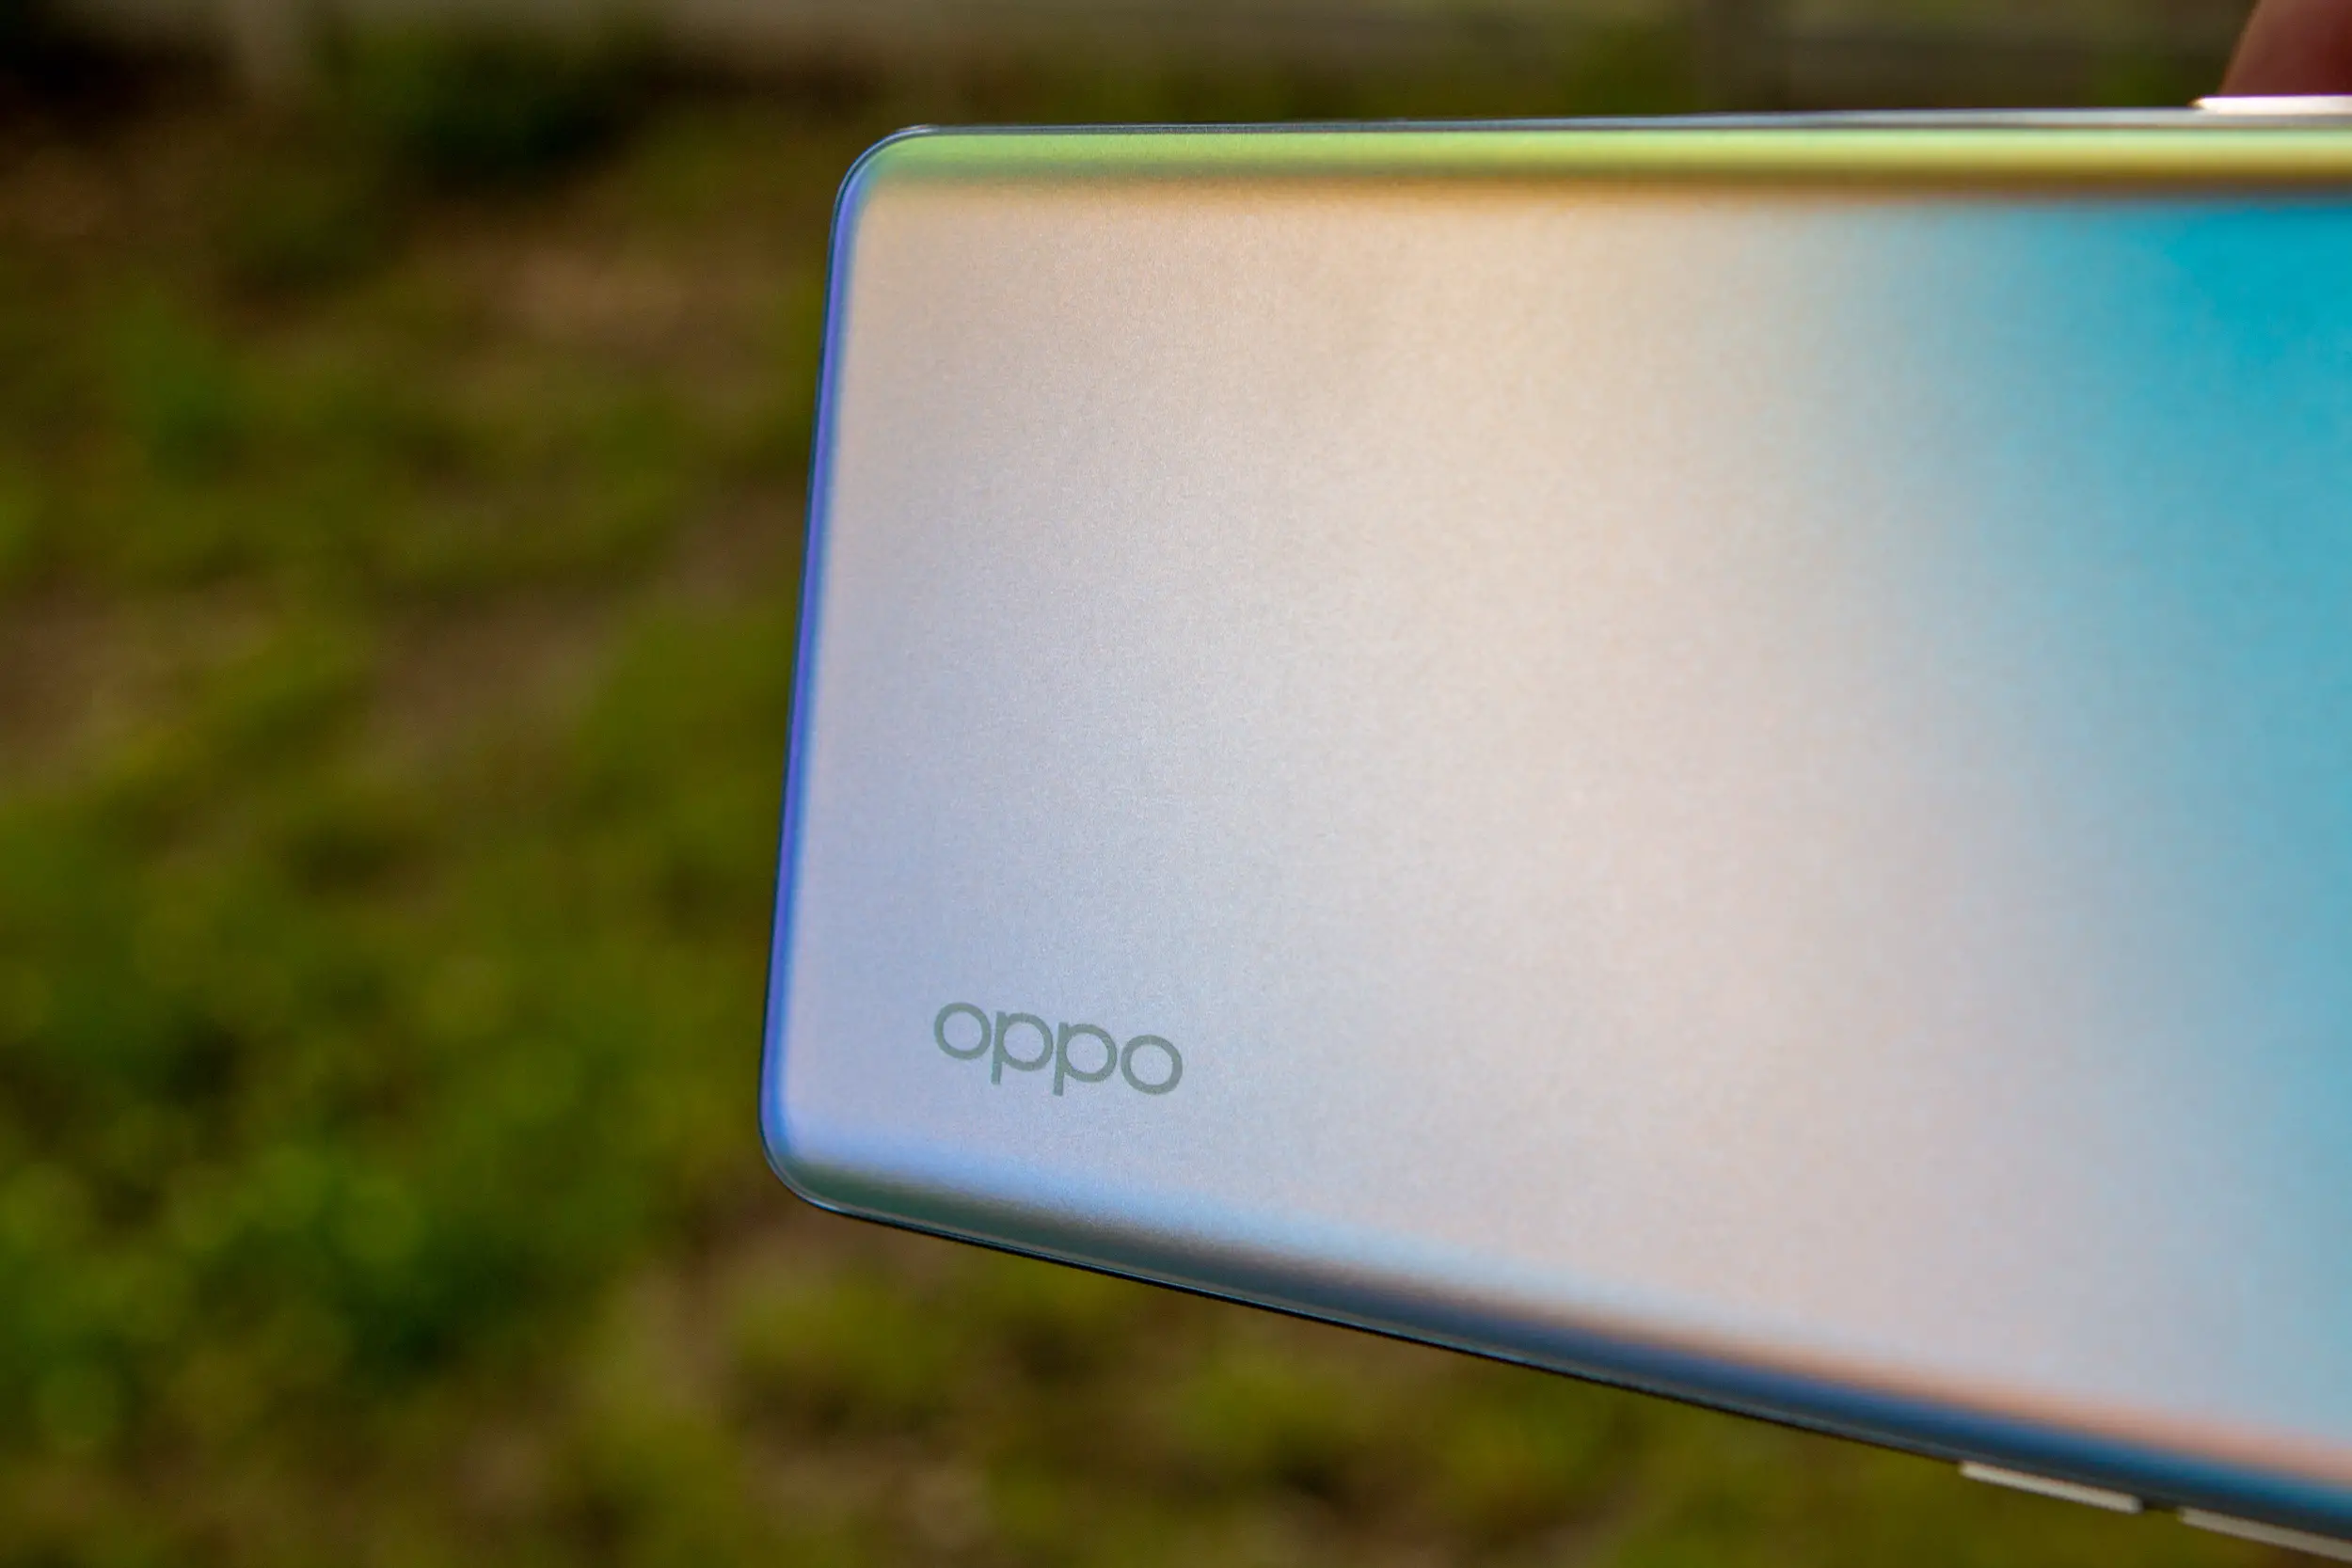 Oppo Phones Banned in Germany After Legal Dispute with Nokia